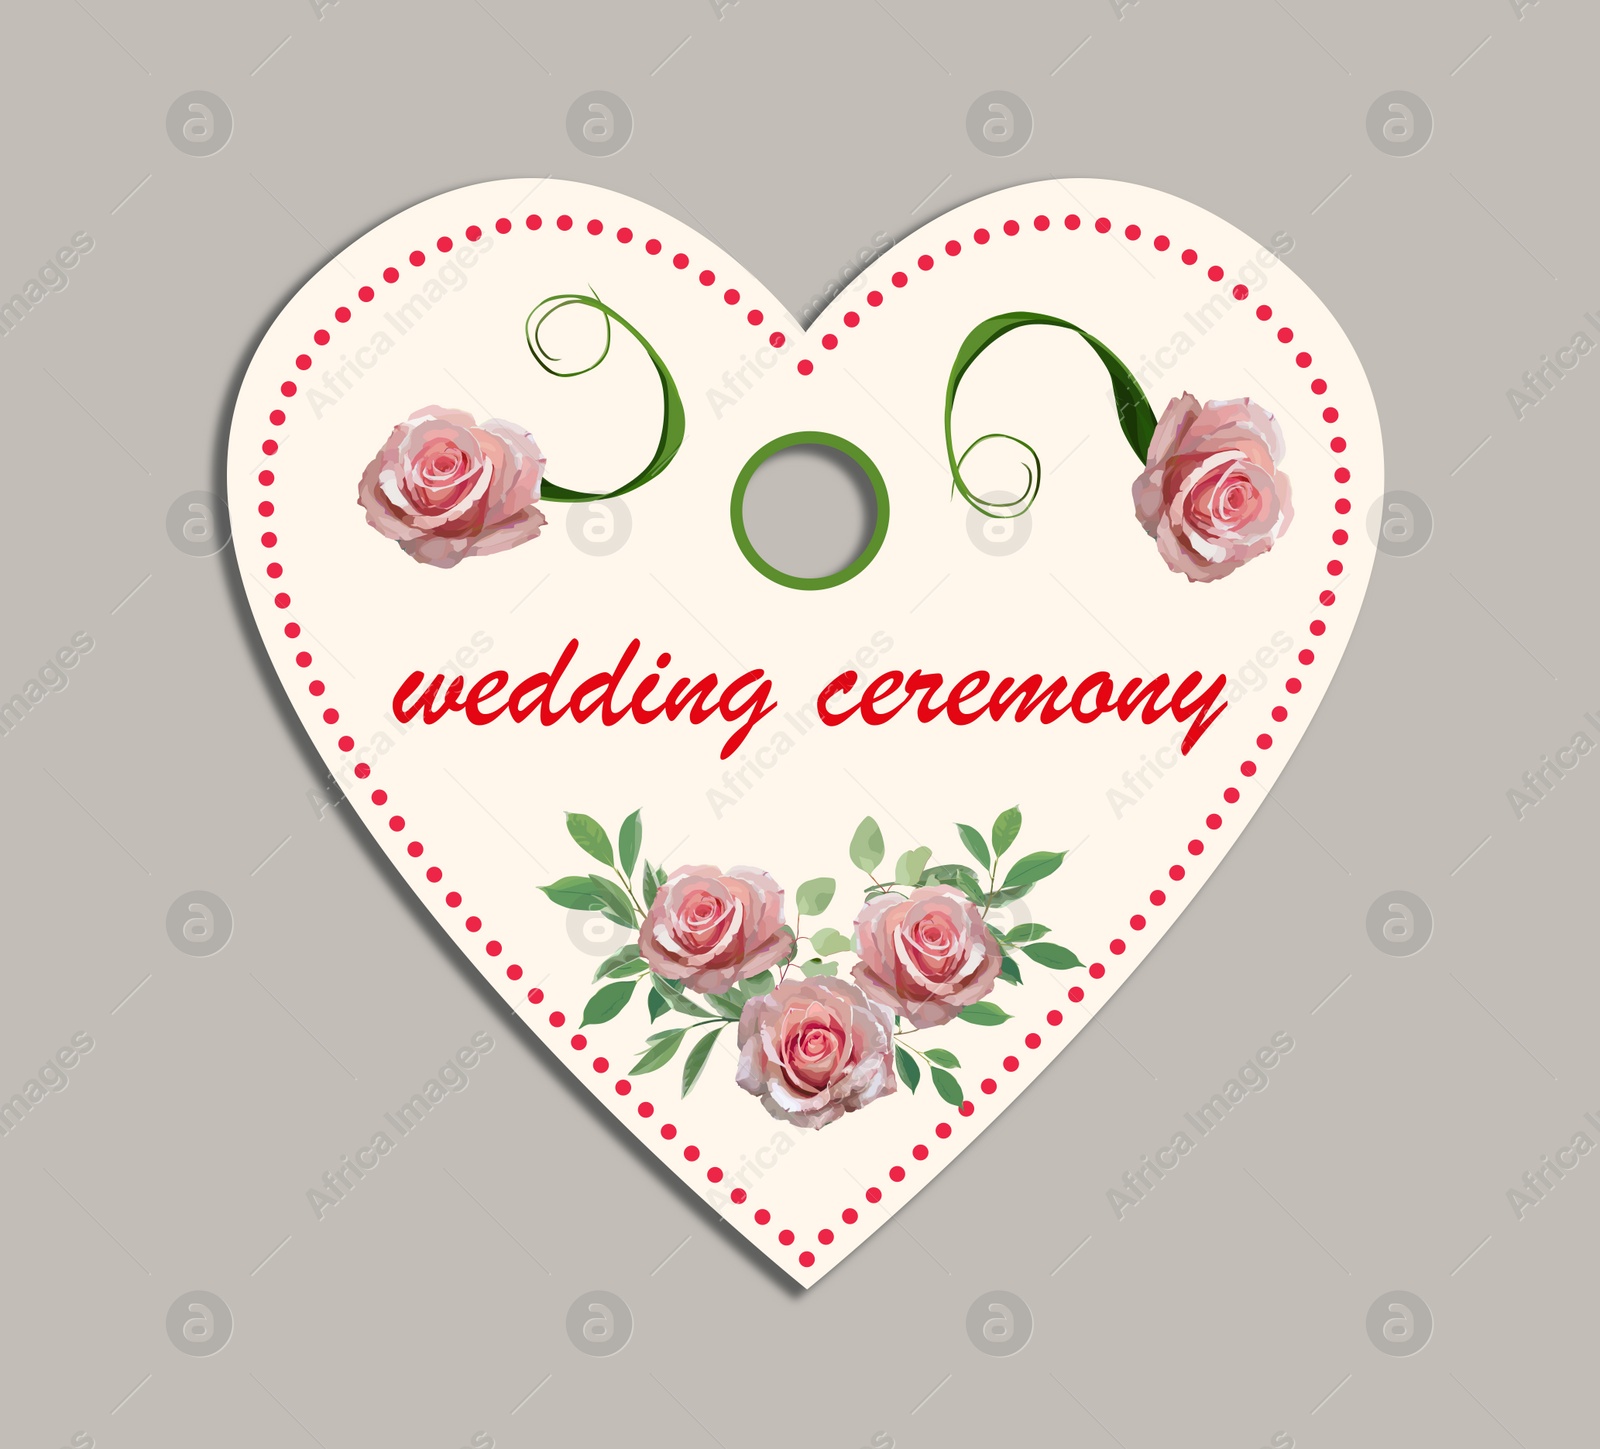 Illustration of Wedding ceremony tag with floral design on grey background, top view